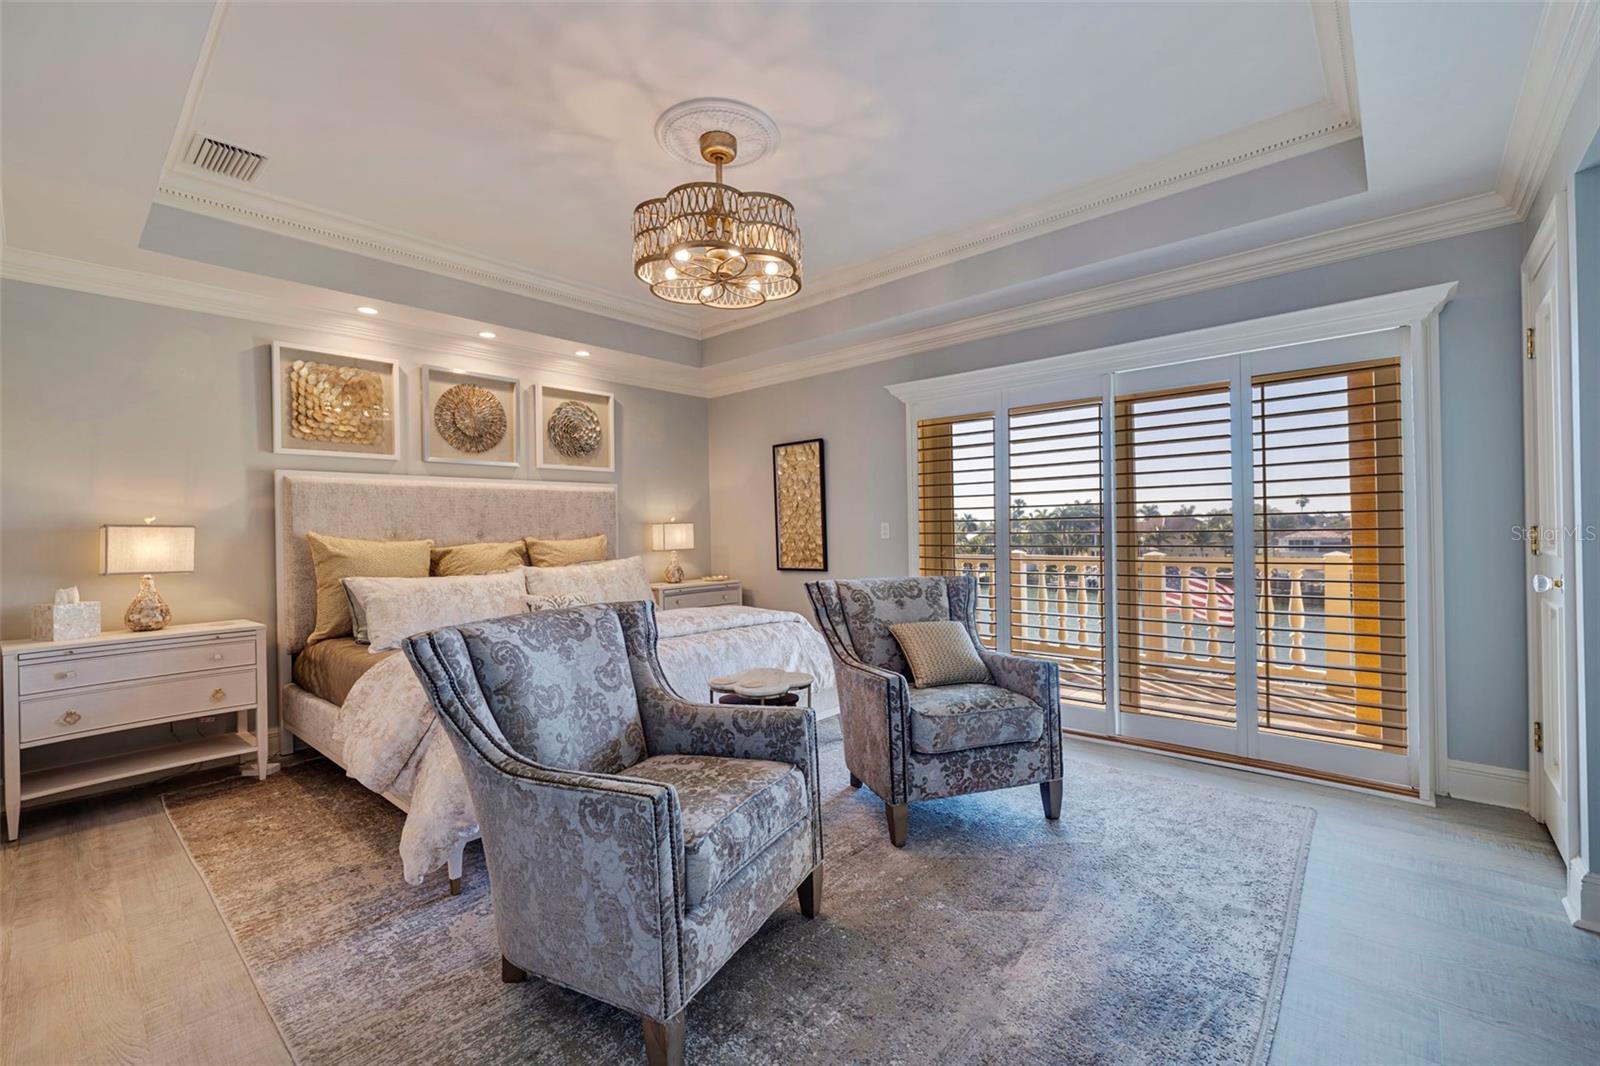 Exquisite primary suite with waterside balcony, ensuite bath, gorgeous ceilings and three closets.